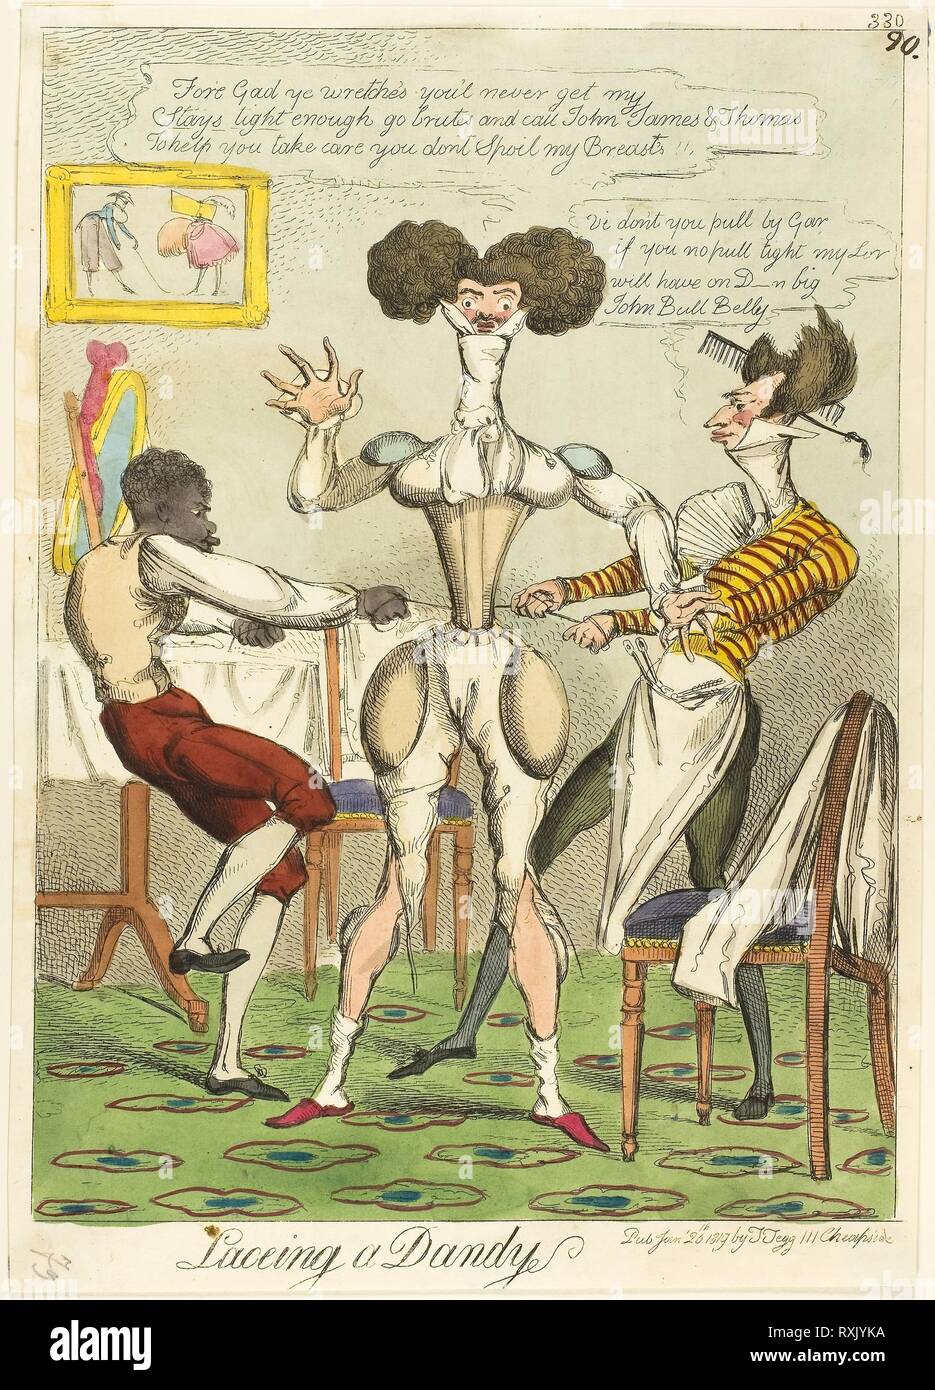 Lacing a Dandy. Unknown Artist (English); published by Thomas Tegg (English, 1776-1845). Date: 1819. Dimensions: 300 × 216 mm (image); 322 × 228 mm (sheet); plate mark not visible. Handcolored etching on cream wove paper. Origin: England. Museum: The Chicago Art Institute. Stock Photo